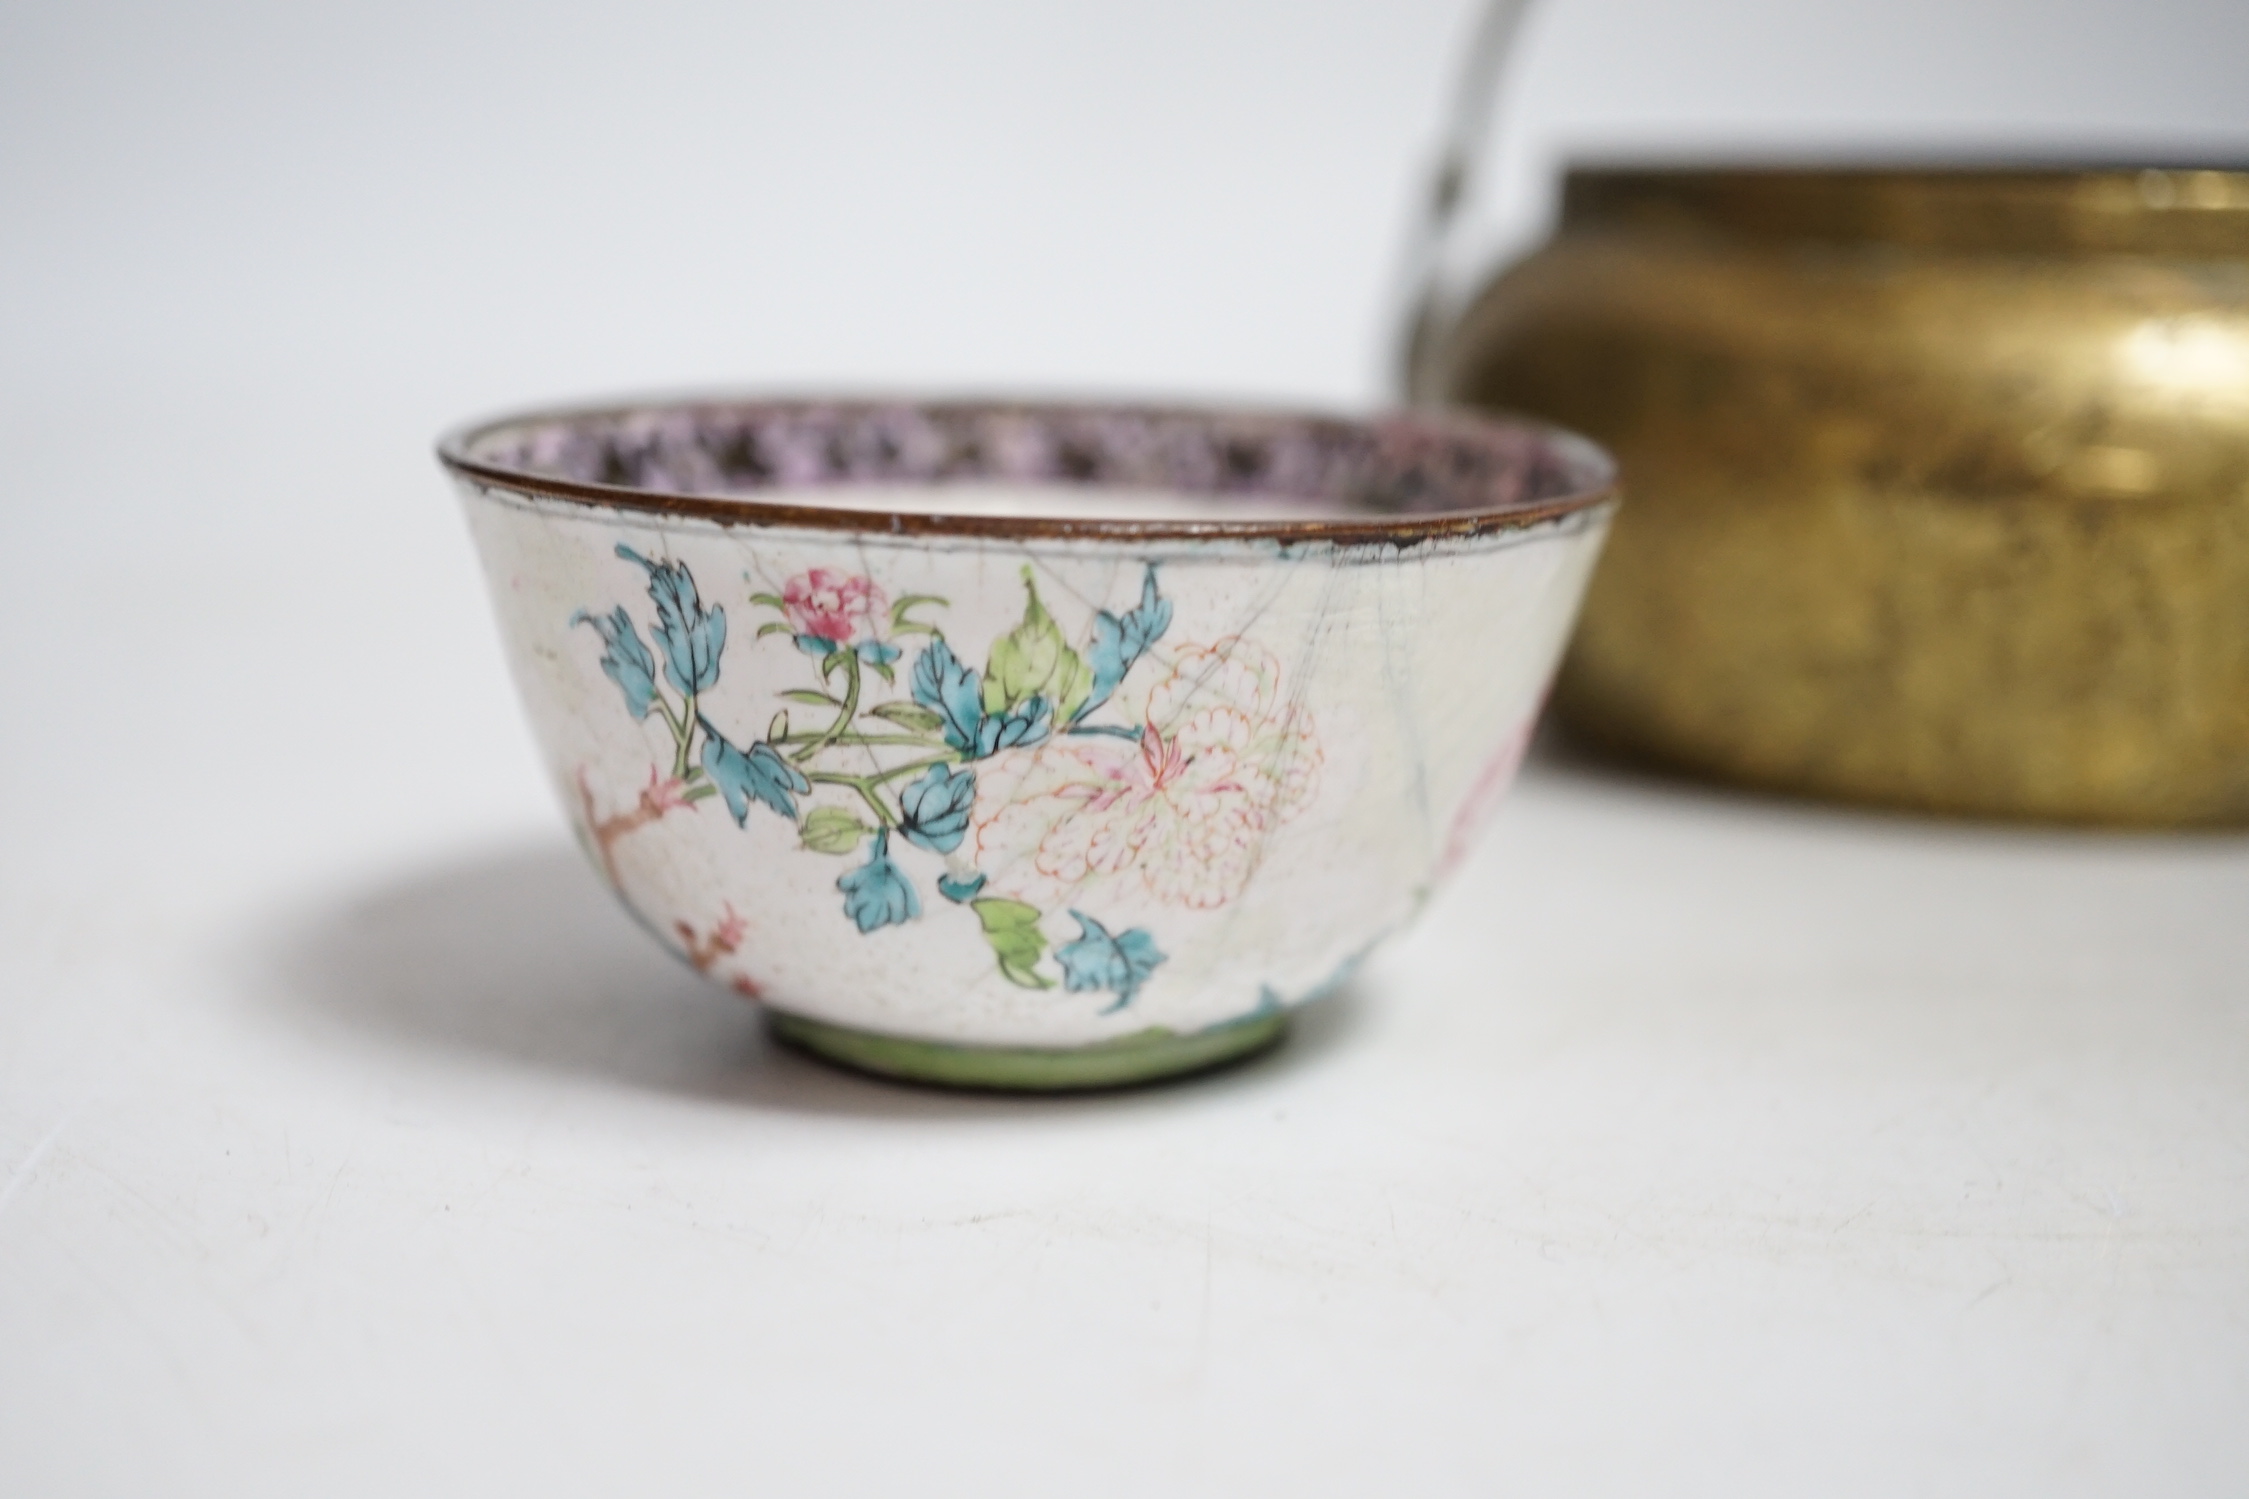 A Chinese bronze hand warmer, 11.3cm and an 18th century Chinese Canton enamel cup, cup 7cm diameter